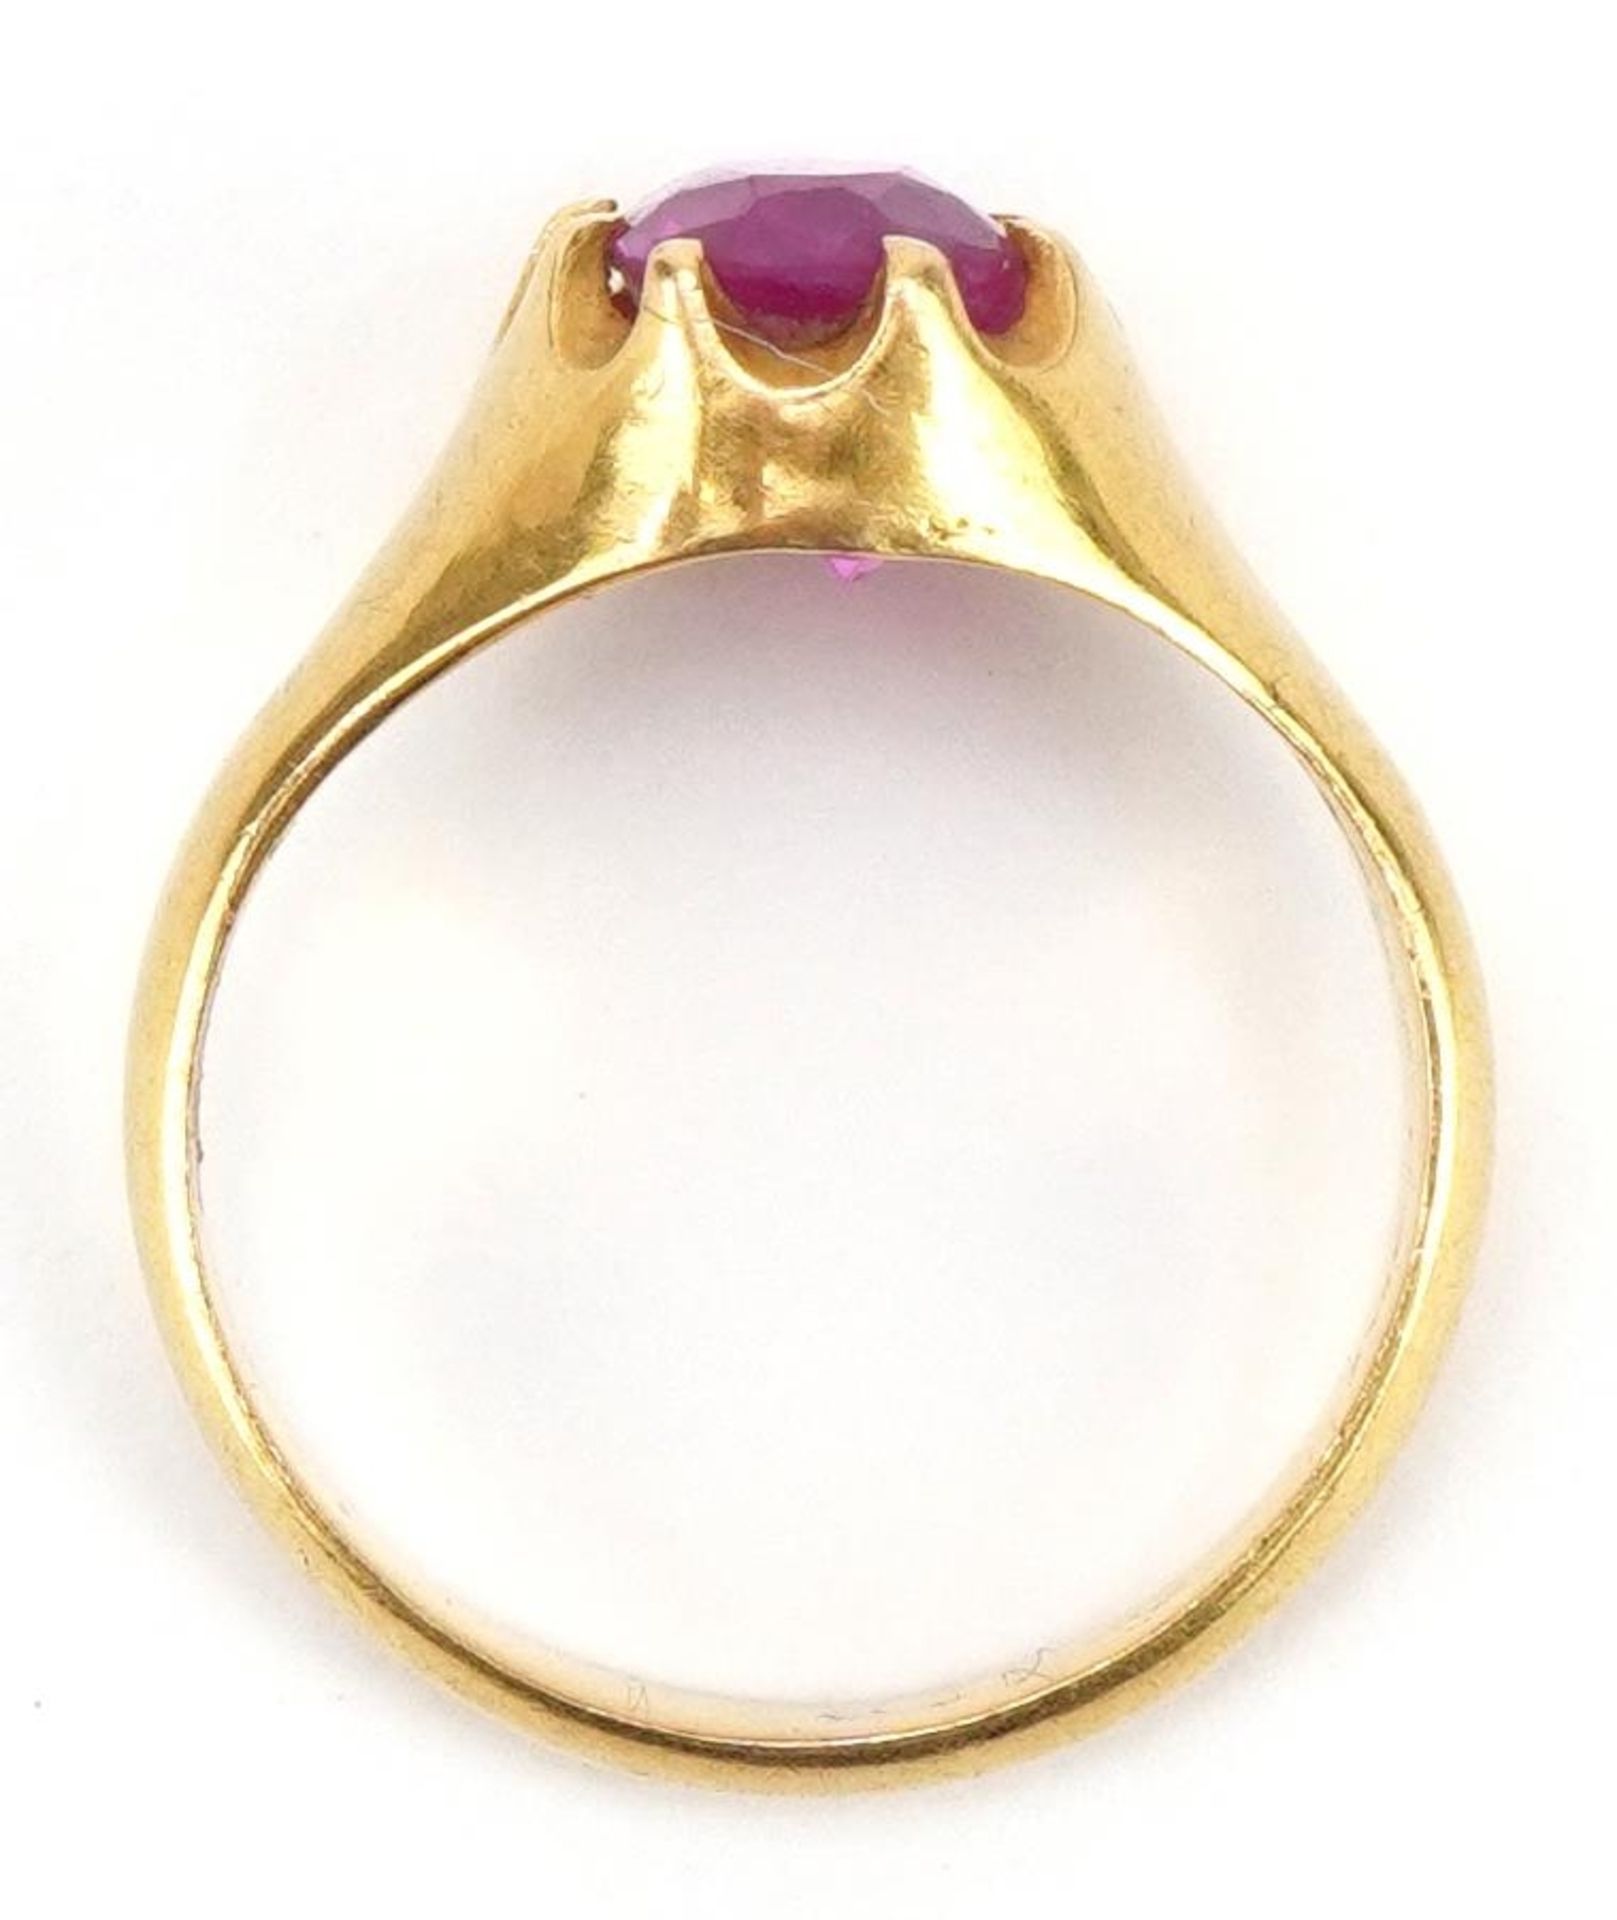 Unmarked gold ruby solitaire ring possibly Indian, tests as 22ct gold, the ruby approximately 10.1mm - Image 3 of 3